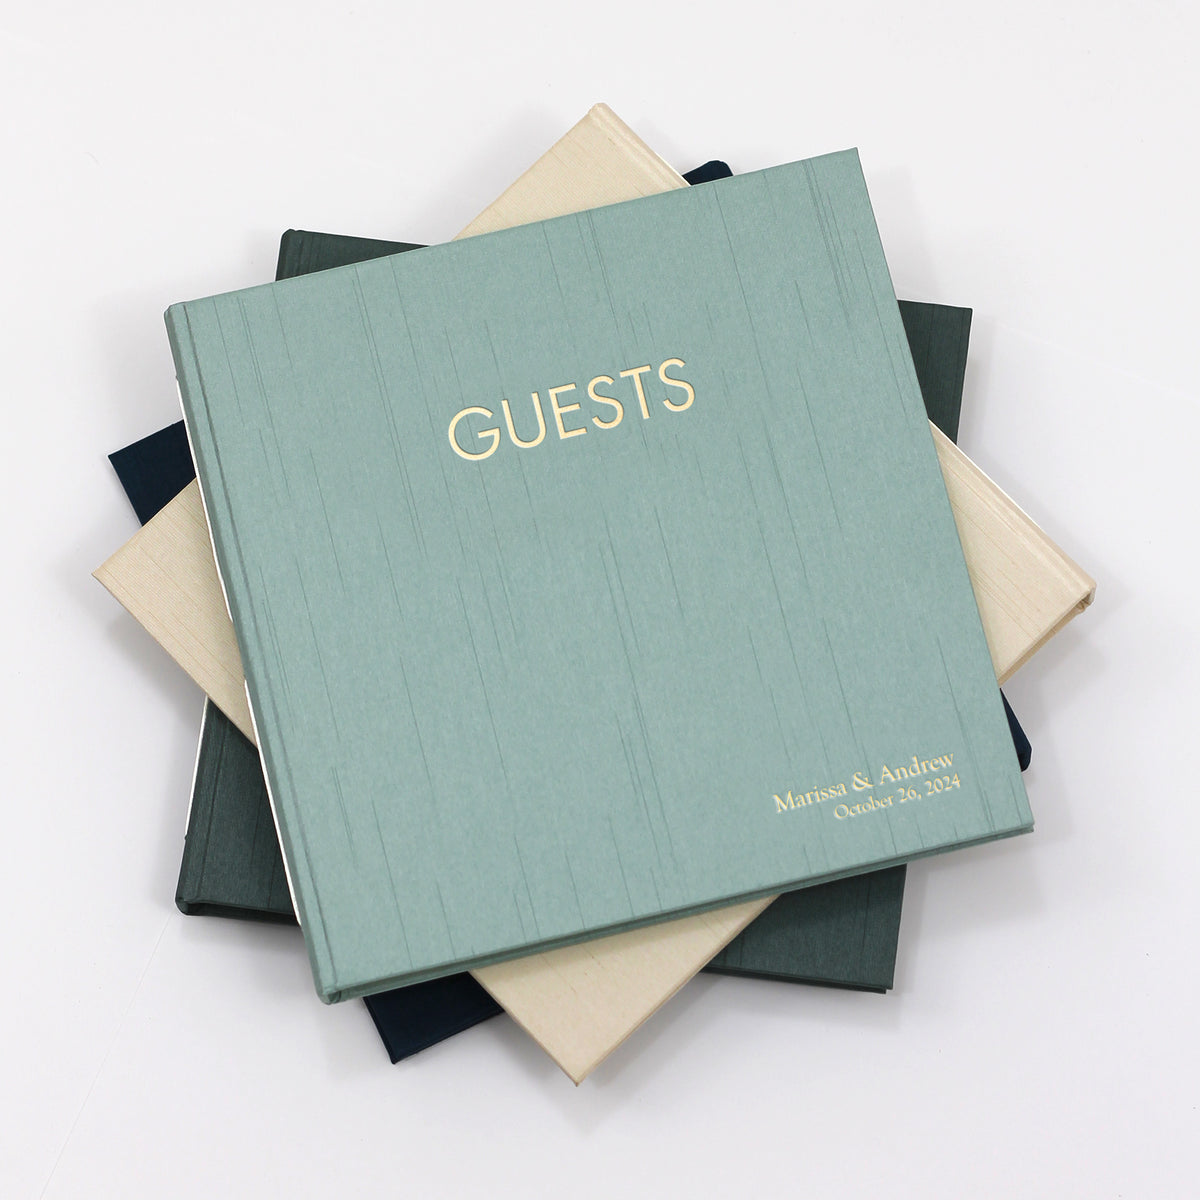 Event Guestbook | Cover: Dove Gray Linen | Available Personalized